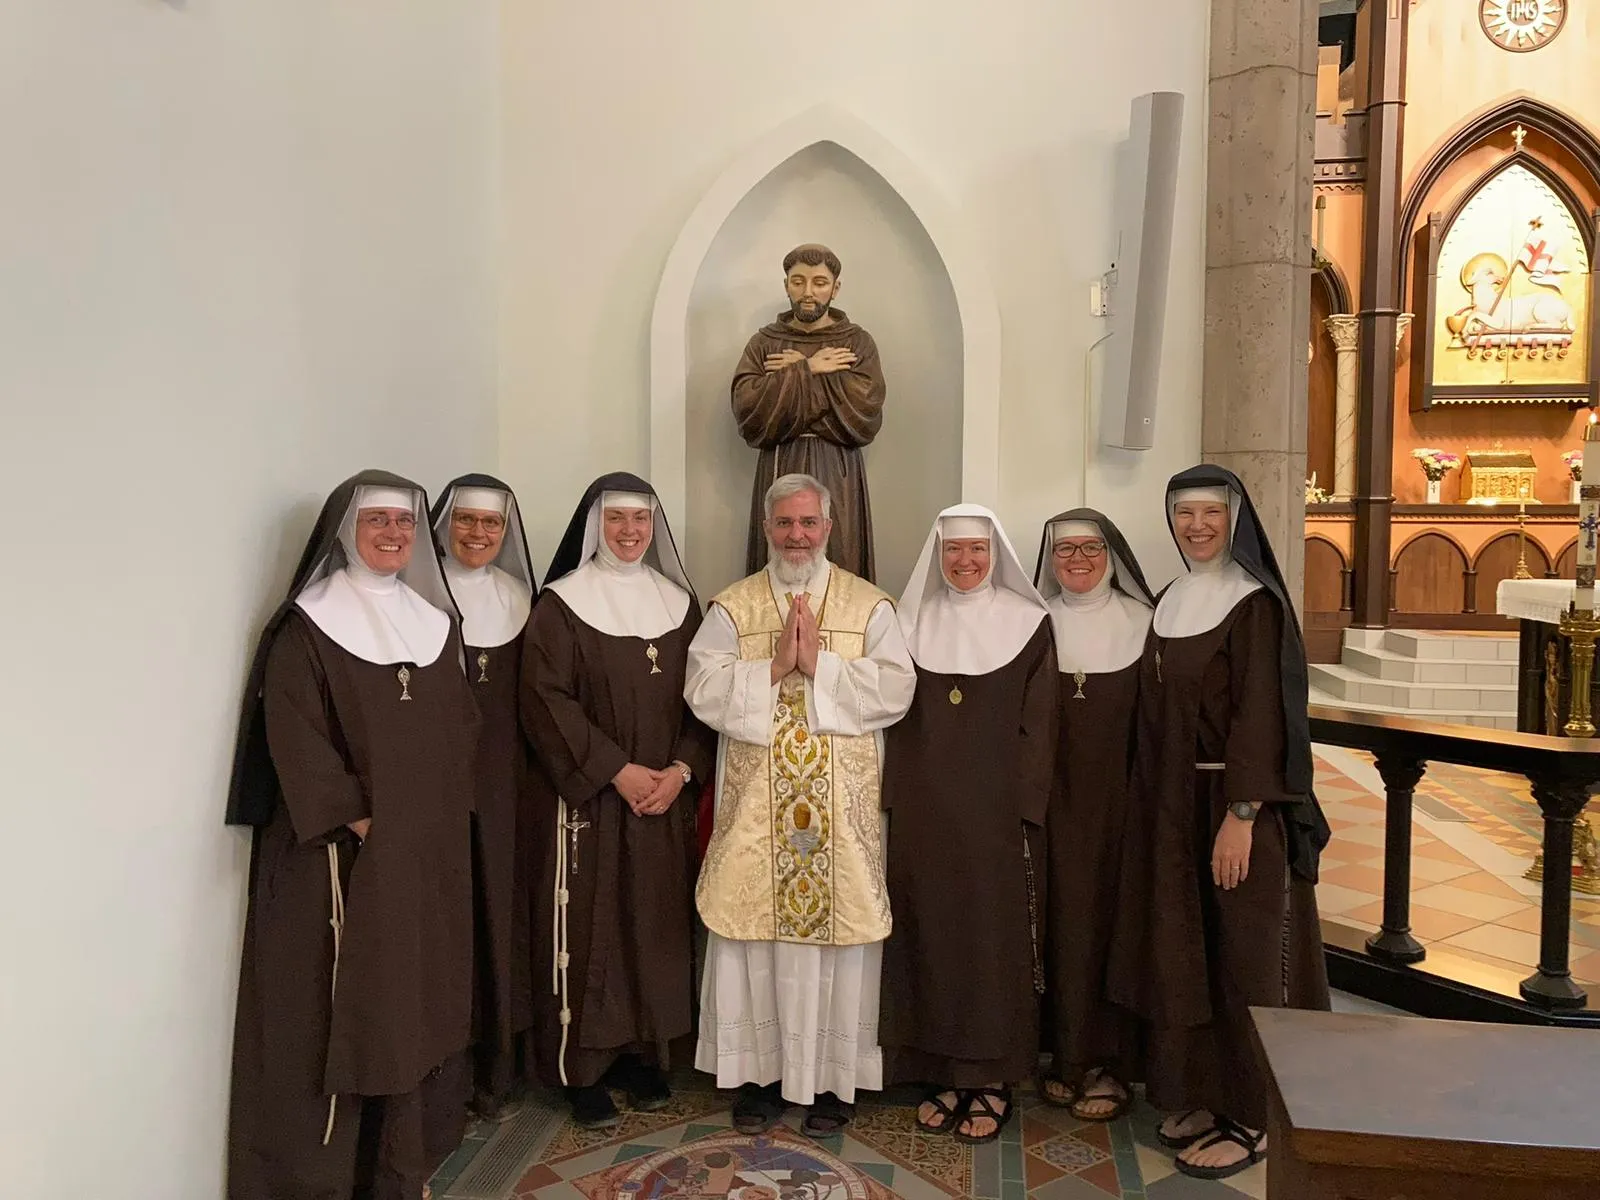 The Poor Clares of Perpetual Adoration from the Our Lady of Solitude Monastery in Tonopah, Arizona, accompanied by their local priest.?w=200&h=150